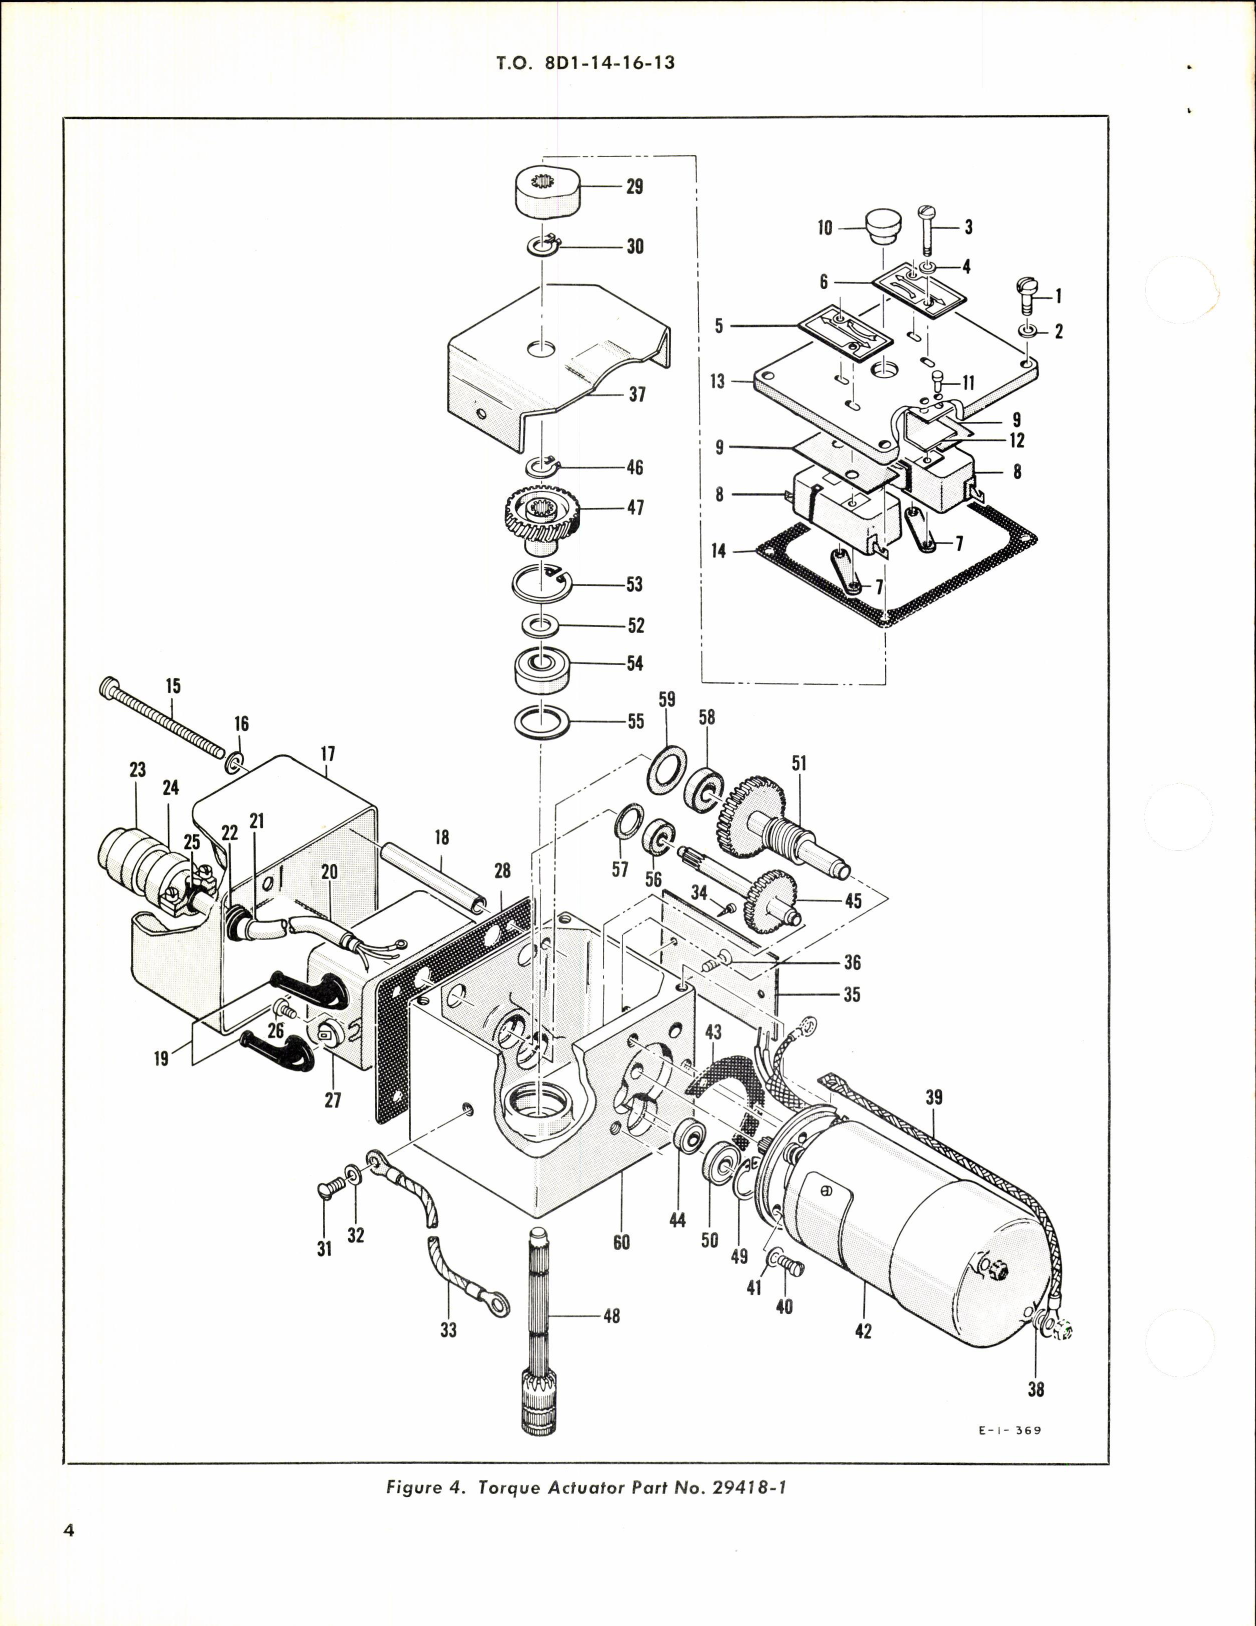 Sample page 4 from AirCorps Library document: Overhaul Instructions w Parts Breakdown Torque Actuator